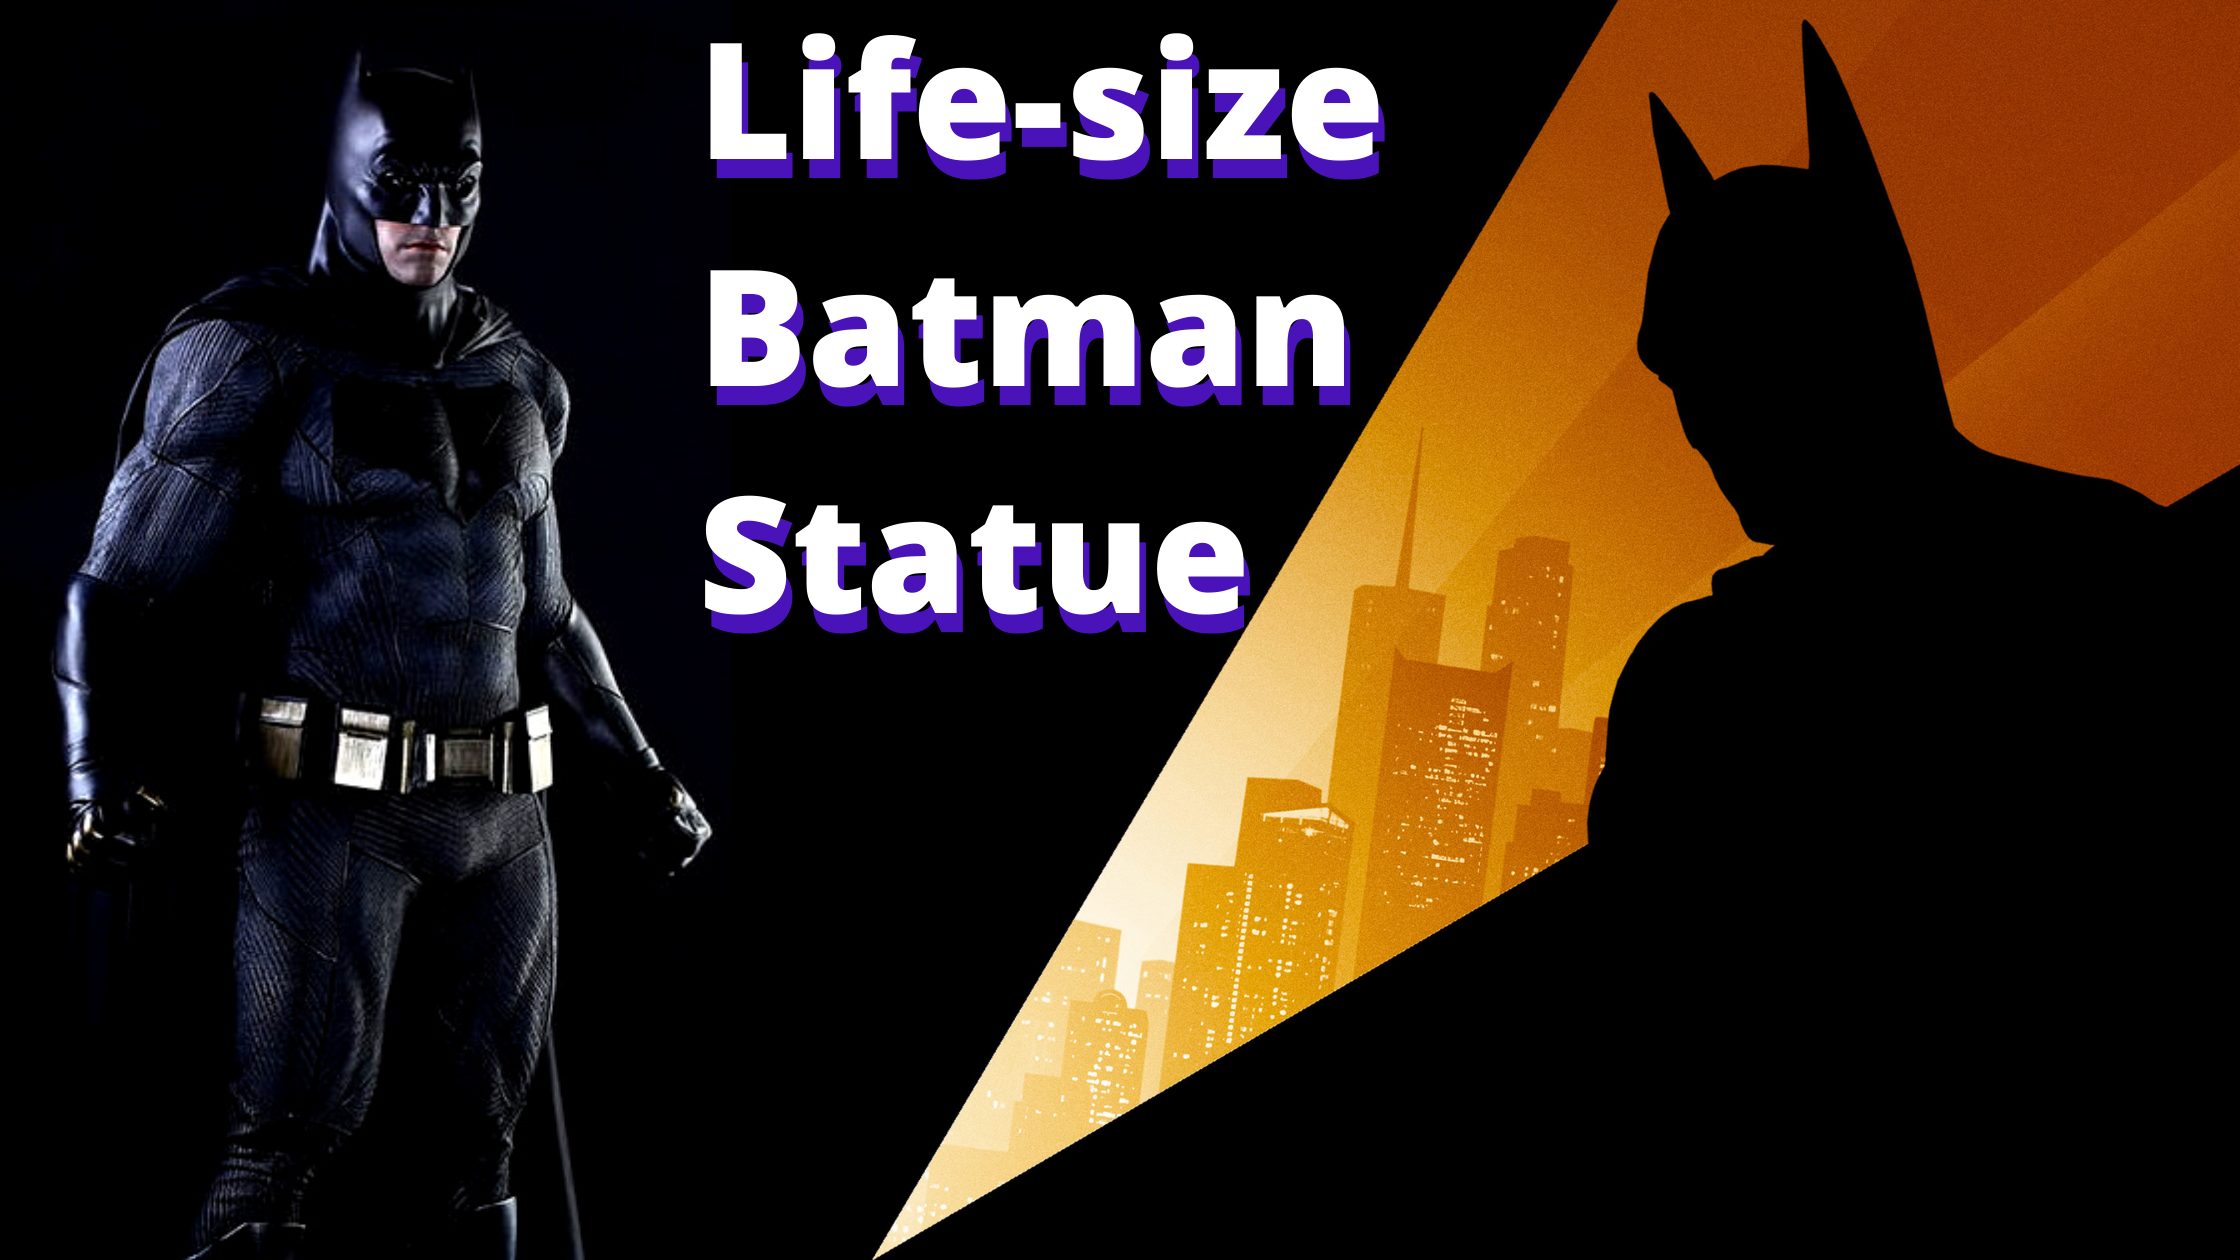 7 Best Life-size Batman Statue To Buy for Your House, Garden etc In 2023